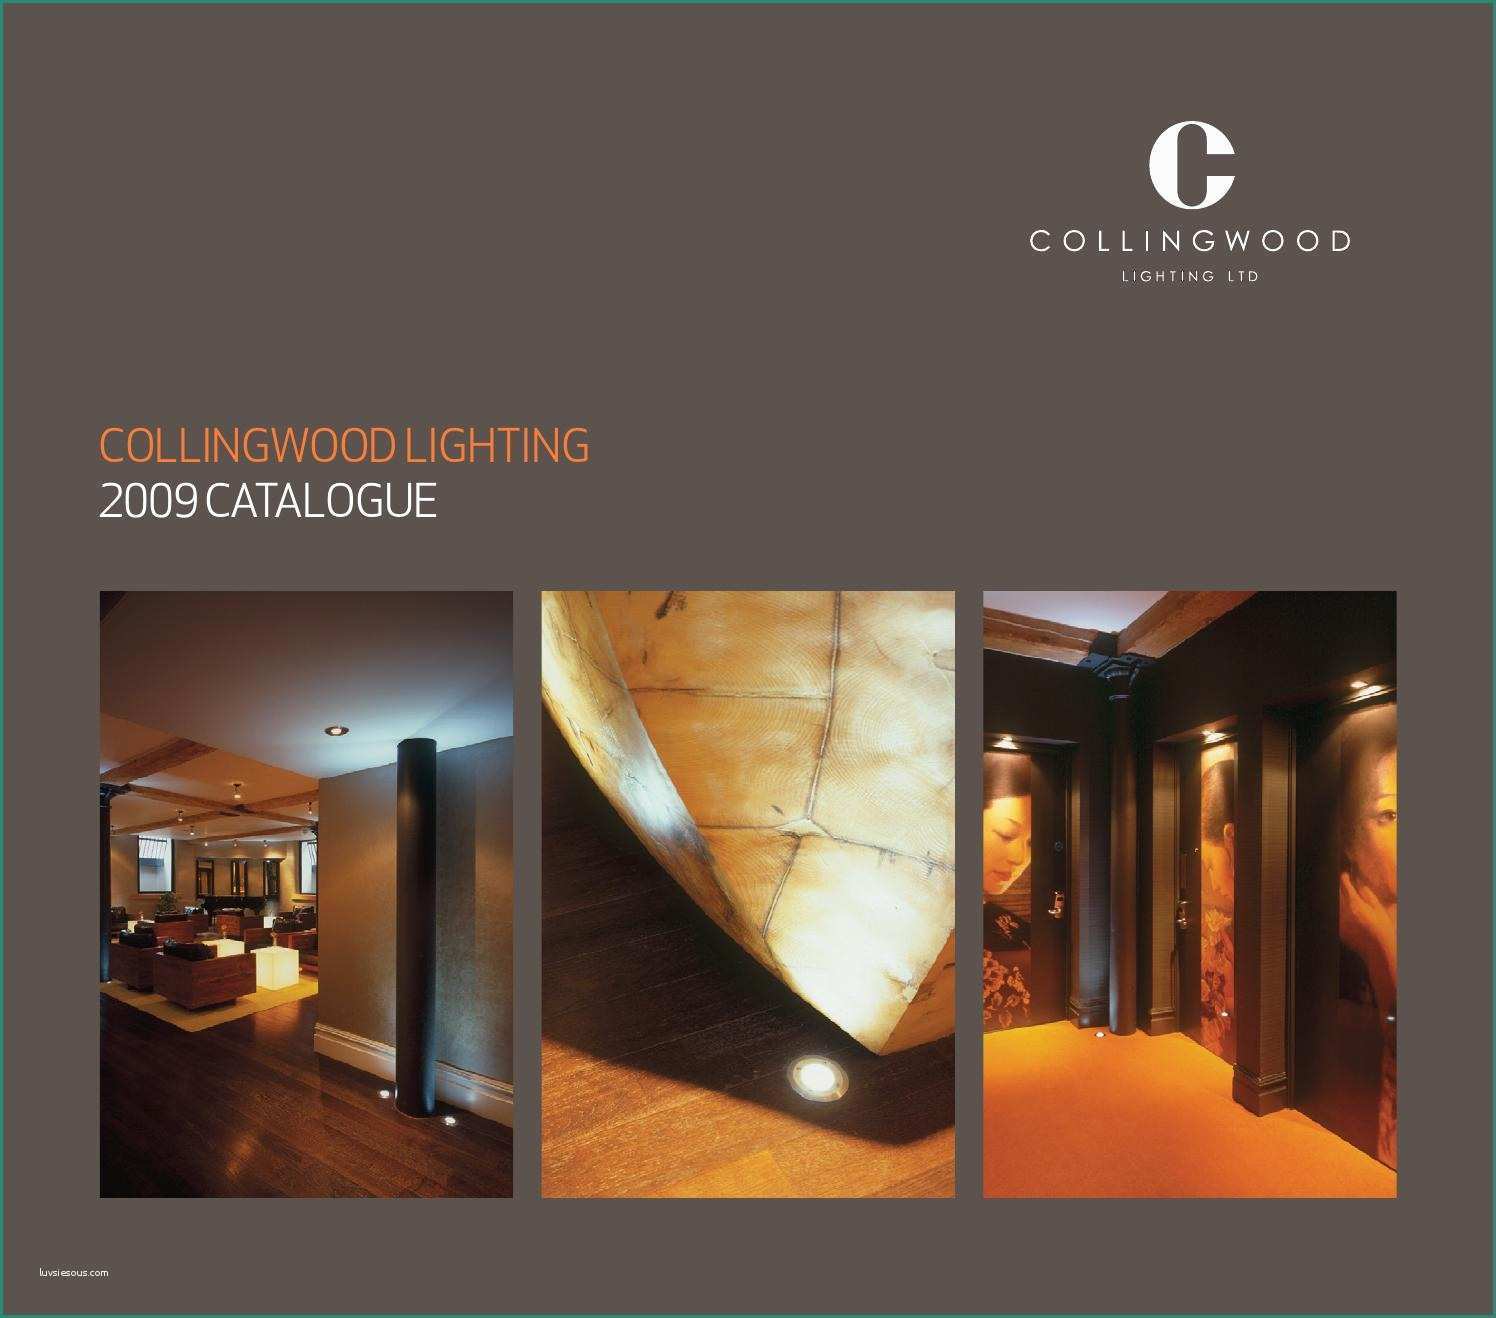 Lampada Led Rs Mm Dimmerabile E Collingwood Lighting Catalogue 2009 by Chris Twidale issuu